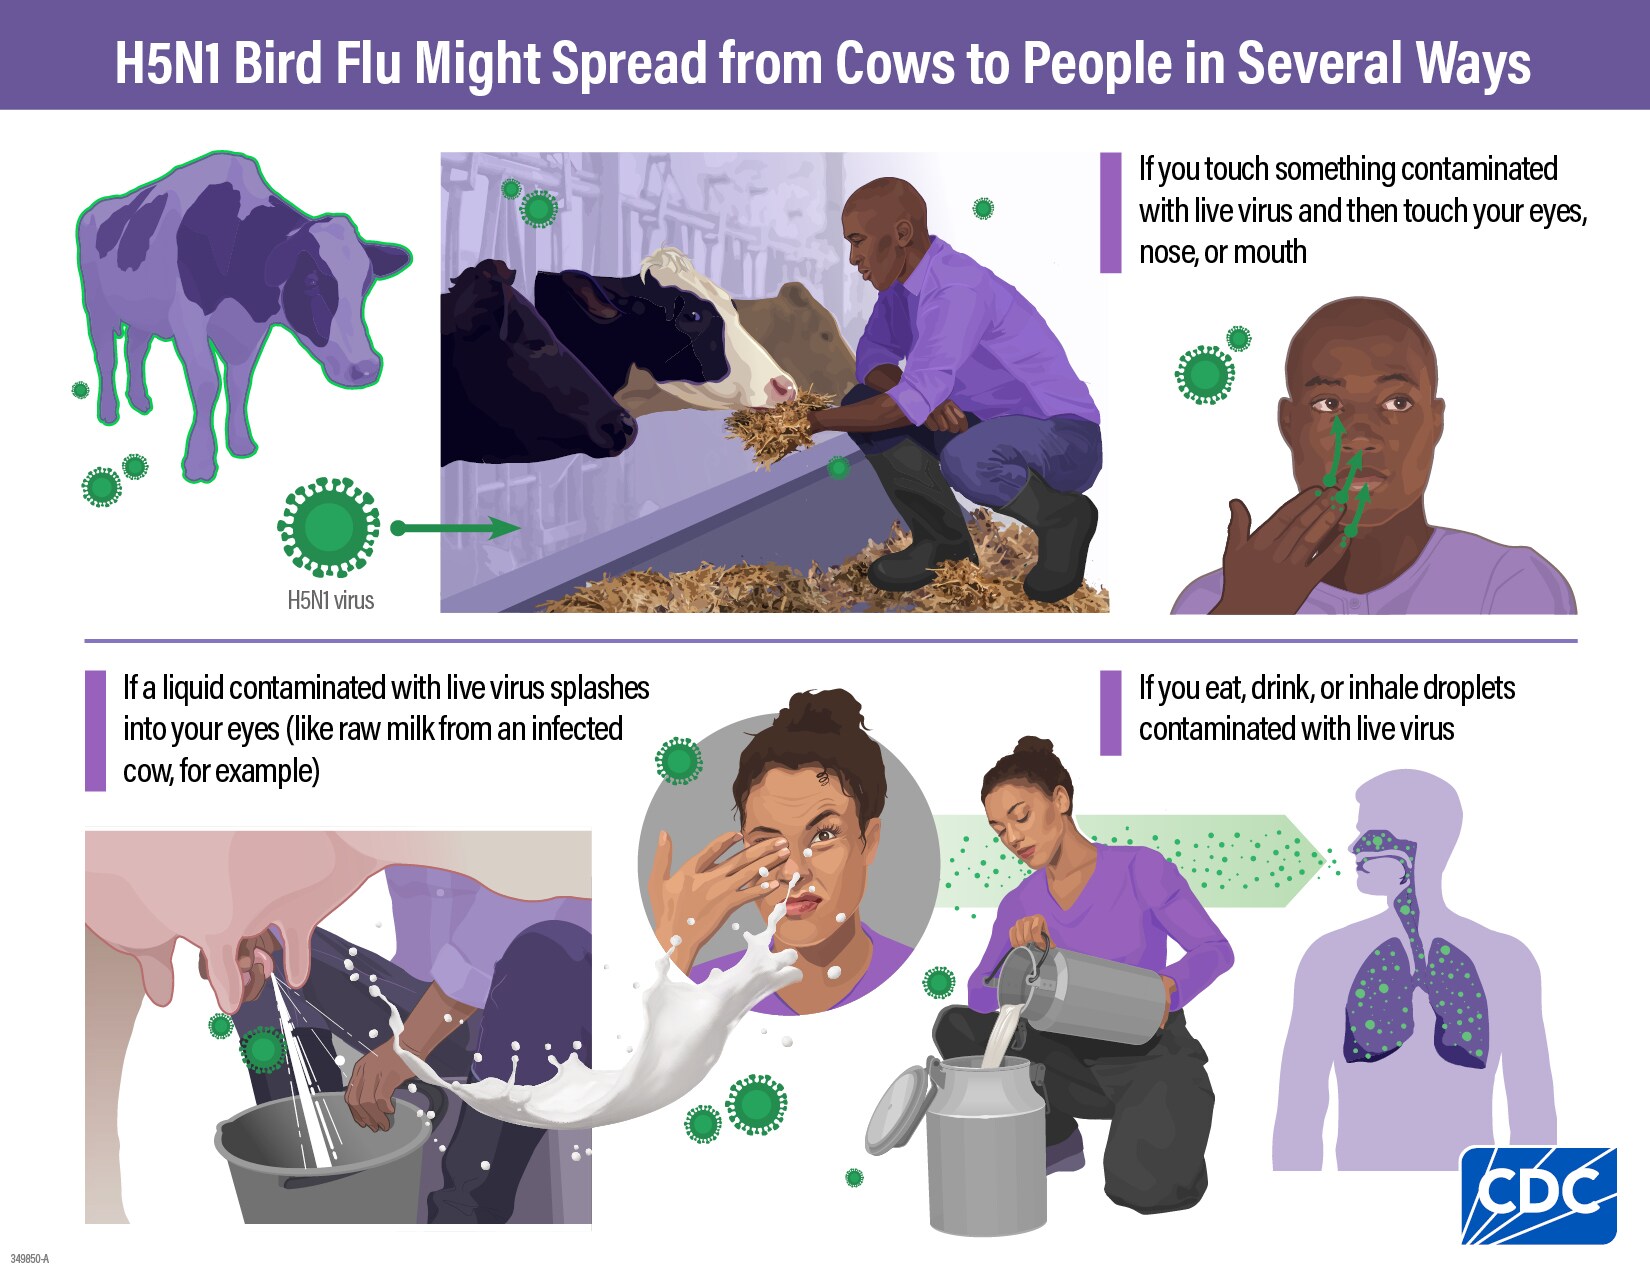 Infographic showing H5N1 bird flu might spread from cows to people in several ways